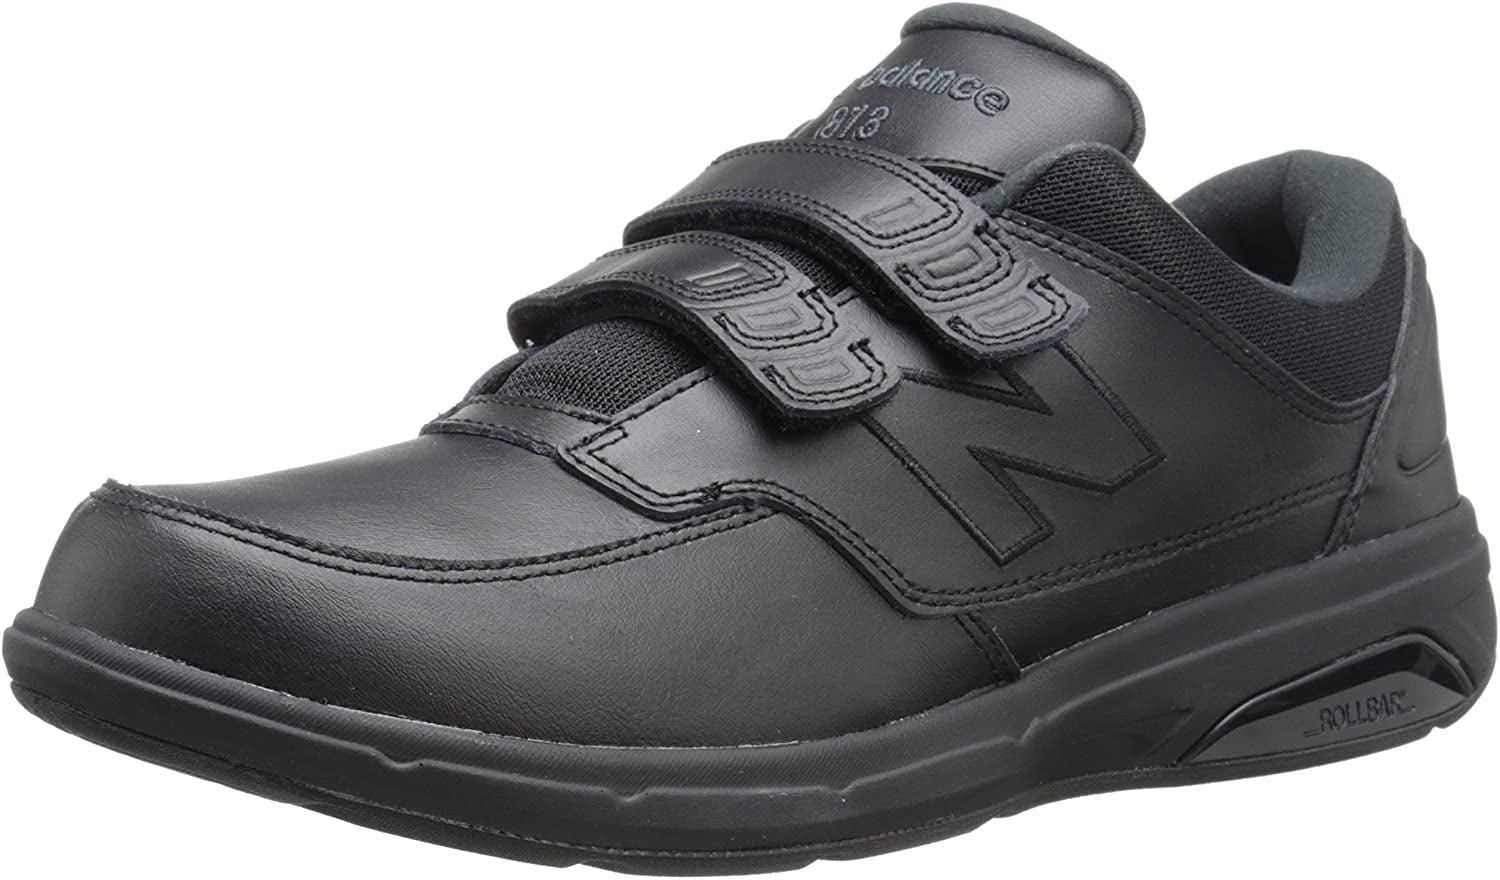 New Balance Shoes With Velcro Fasteners | lupon.gov.ph